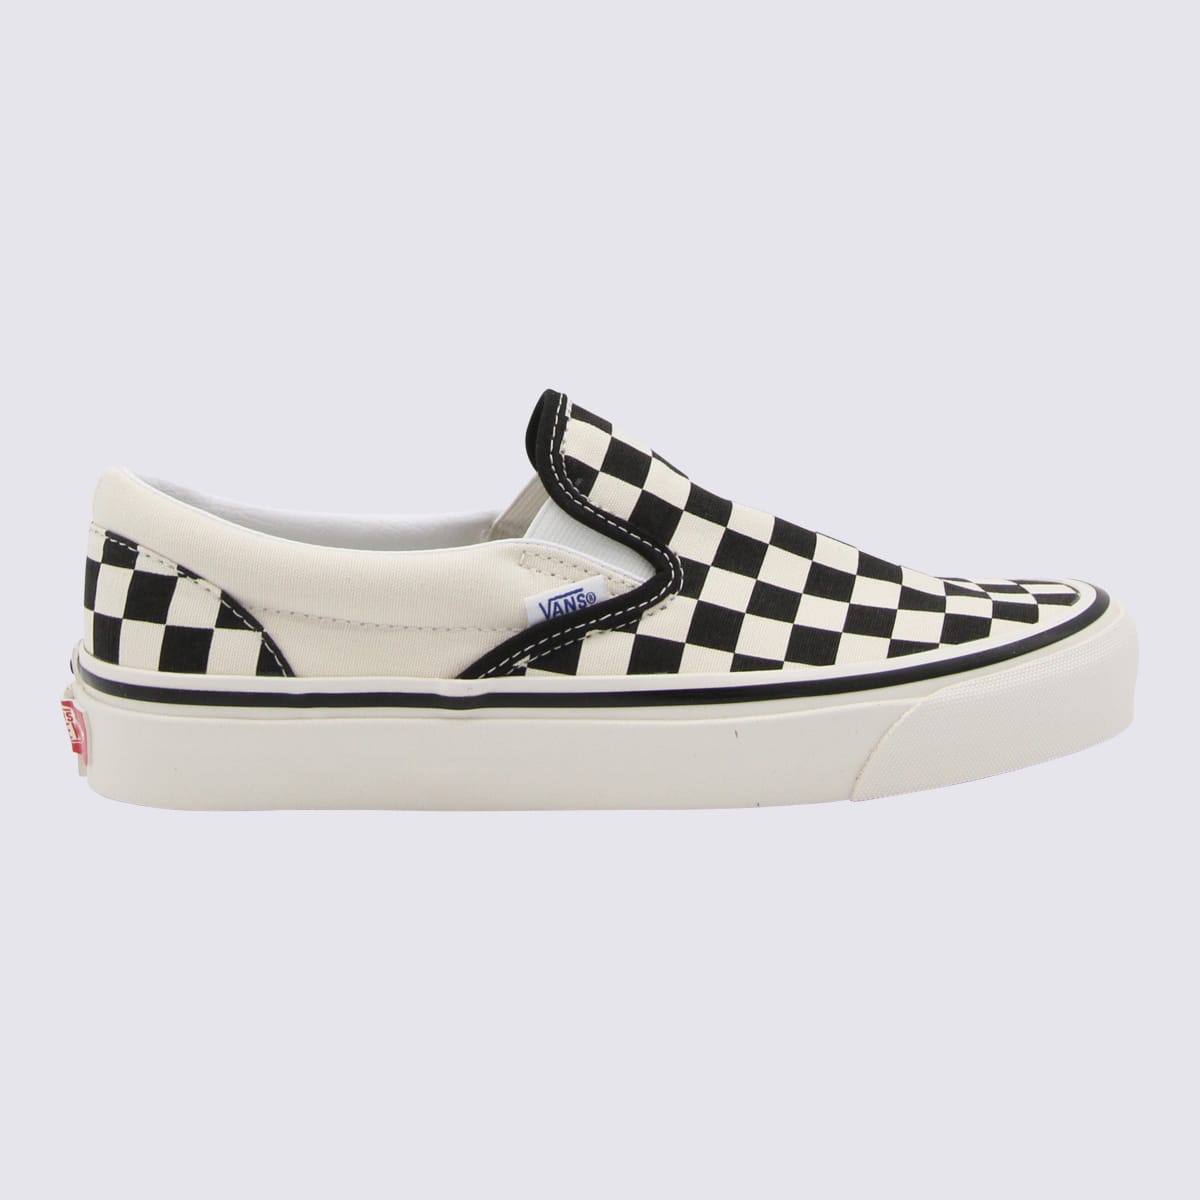 Vans White And Black Canvas Sneakers